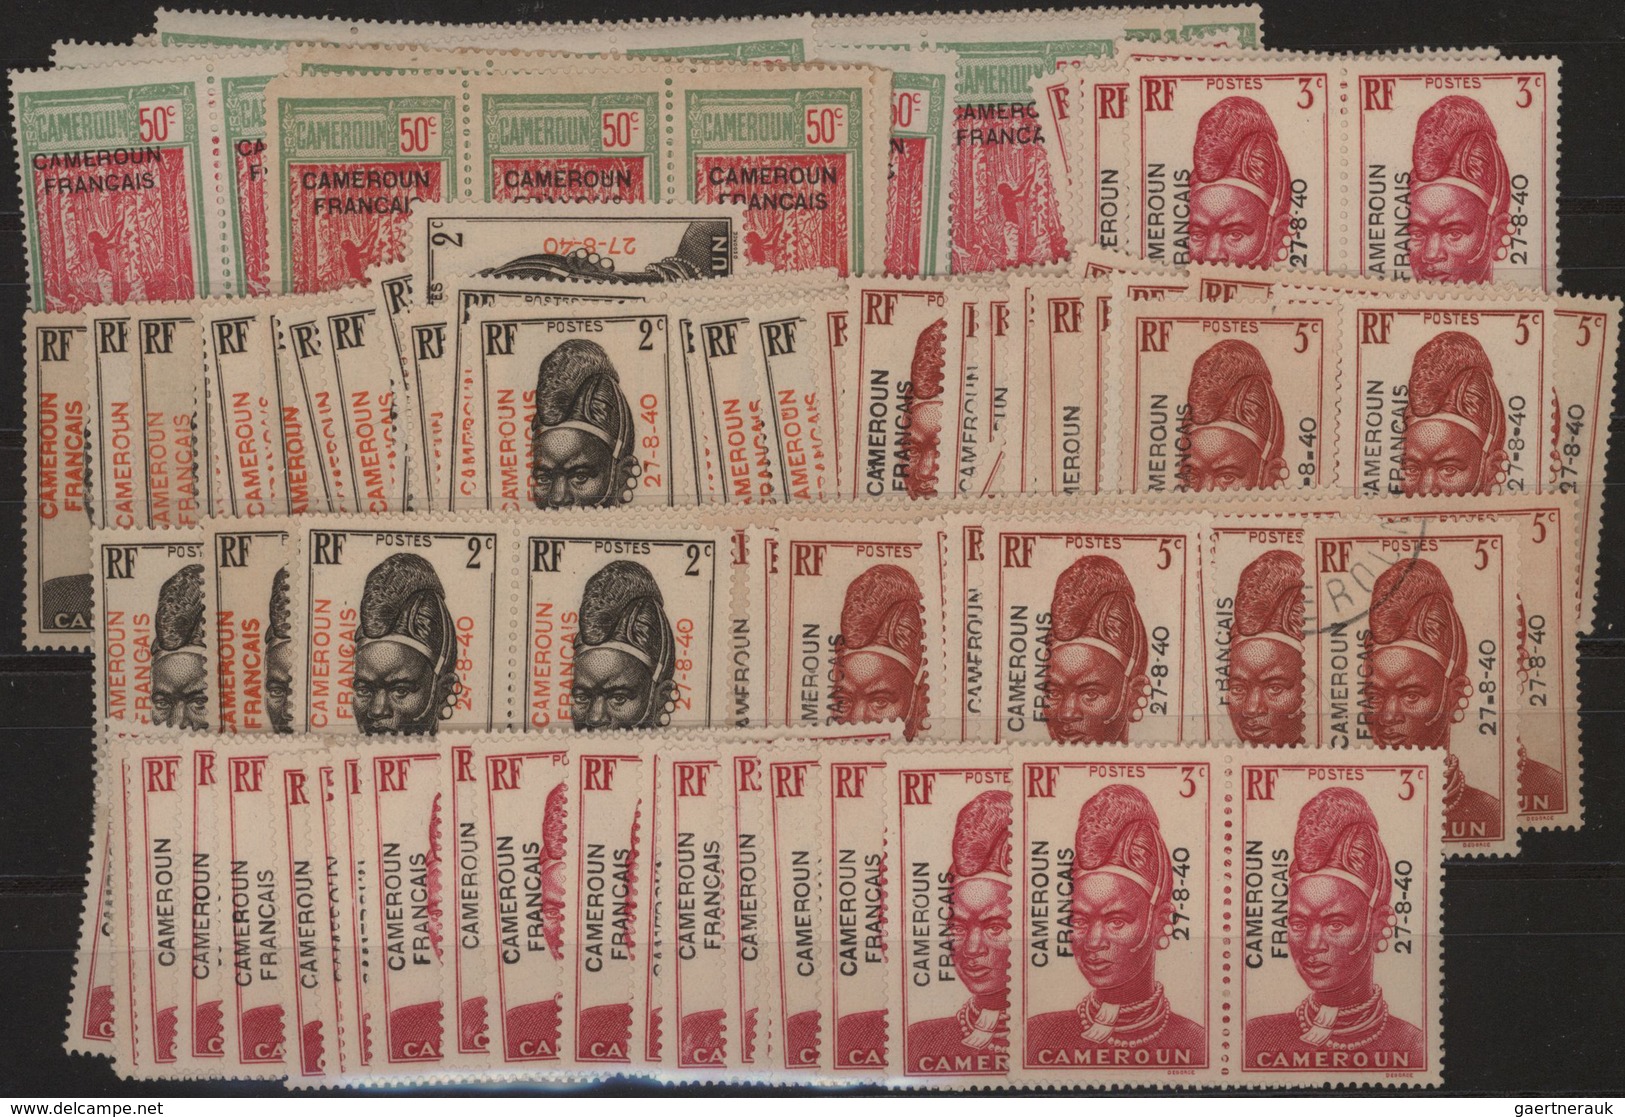 Kamerun: 1940, Yvert 202, 208-212 And 222 Overprint Issues: Approximately 600 Stamps Mainly Unused, - Cameroun (1960-...)